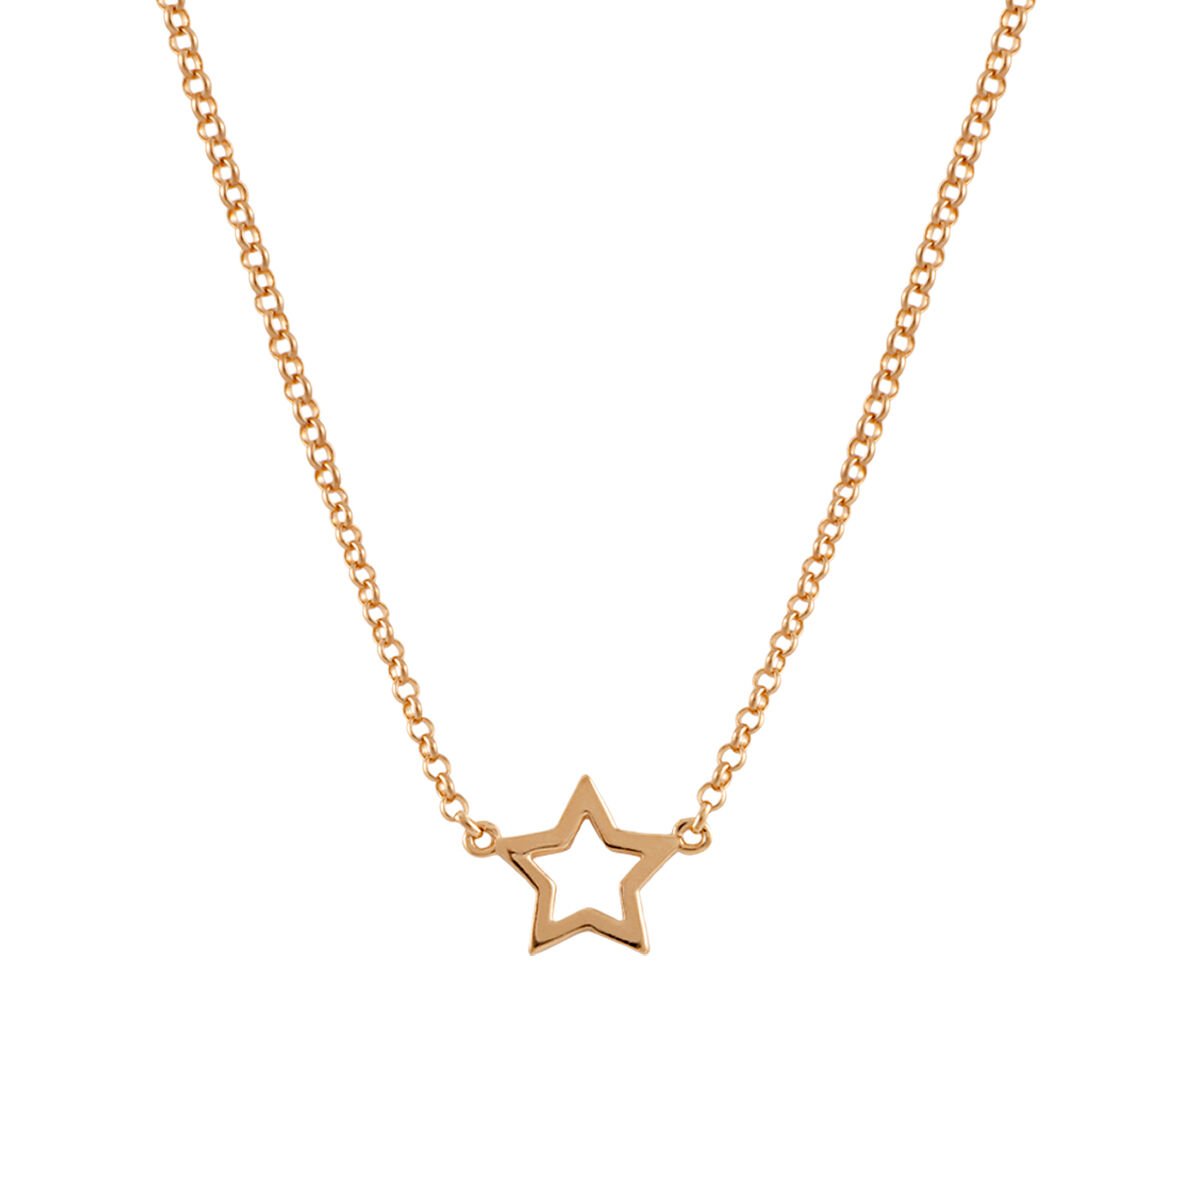 Rose gold plated hollow star necklace , J00659-03, hi-res